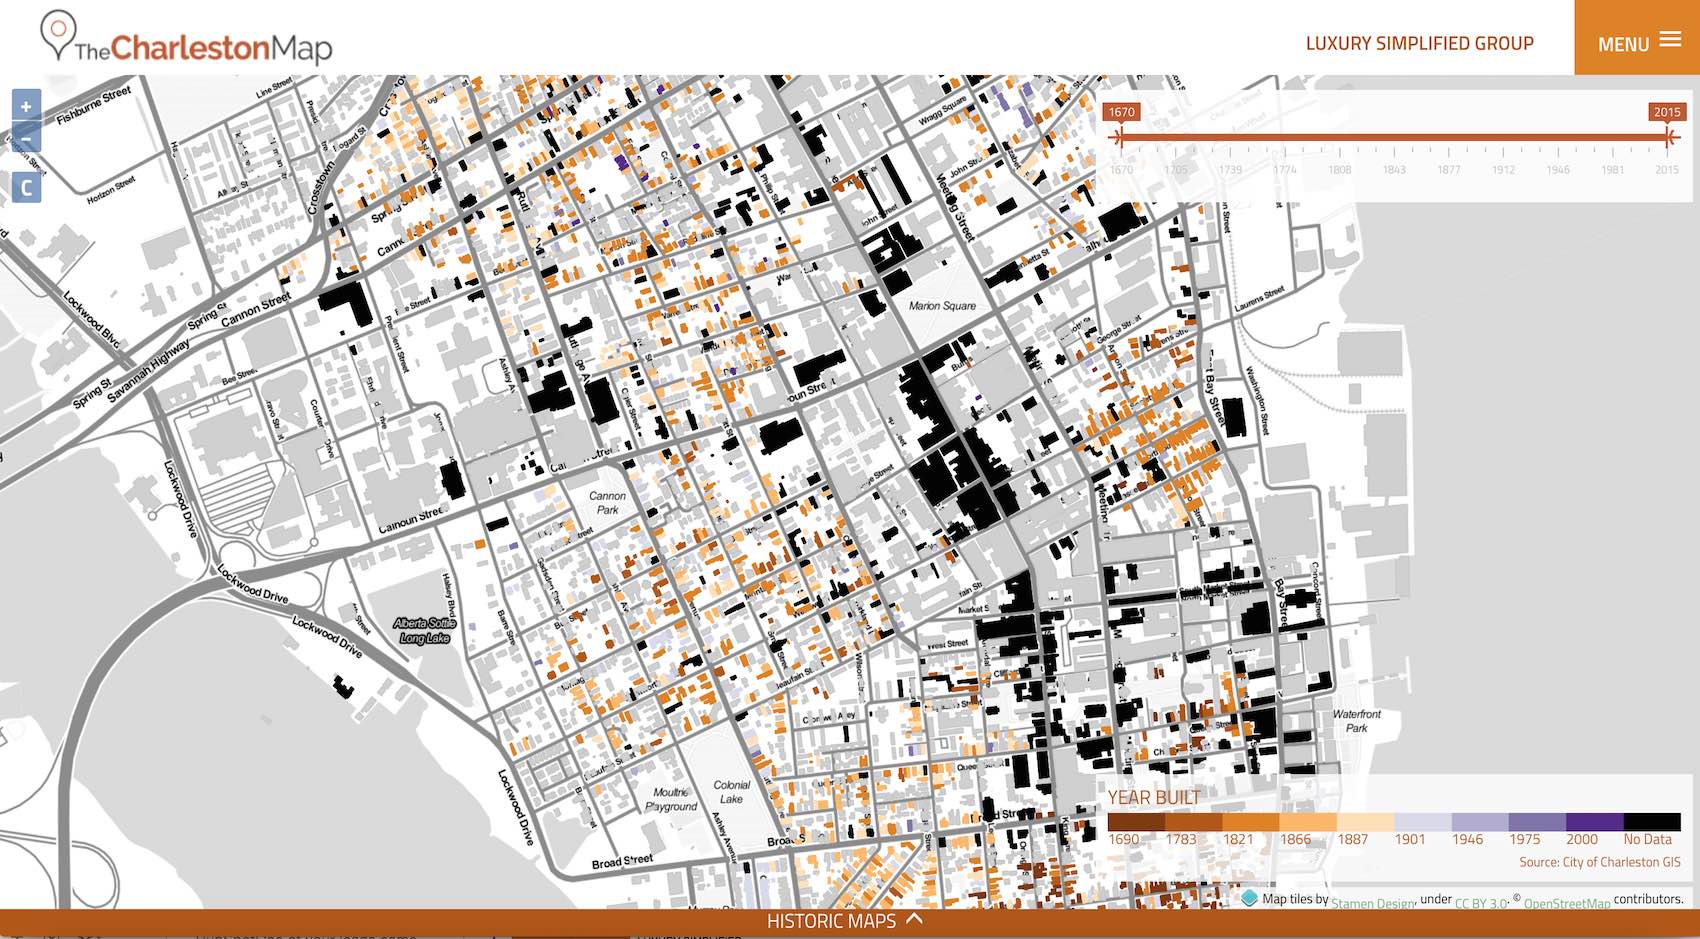 Map of Charleston from 1670 to 2010 